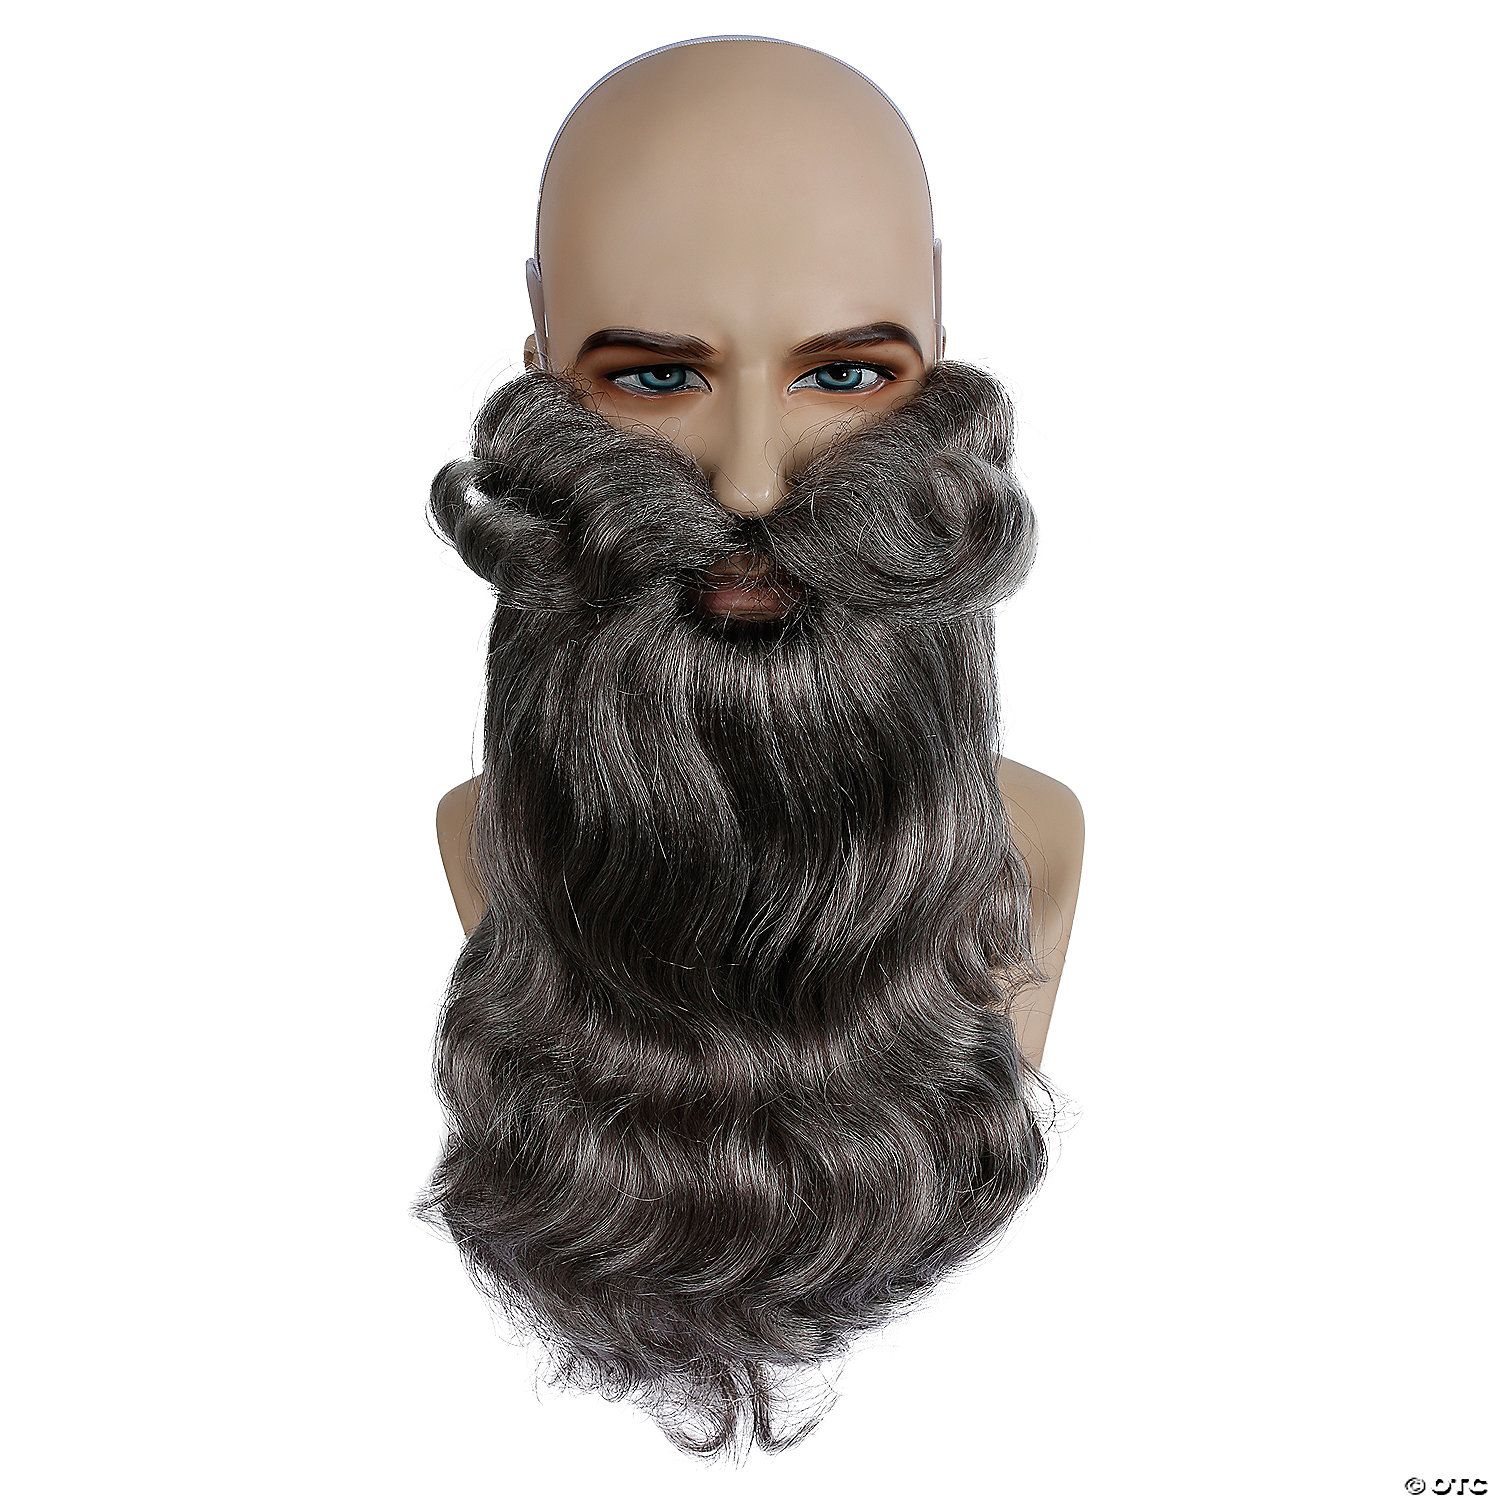 Lacey Wigs Morris Costumes Strap Beard